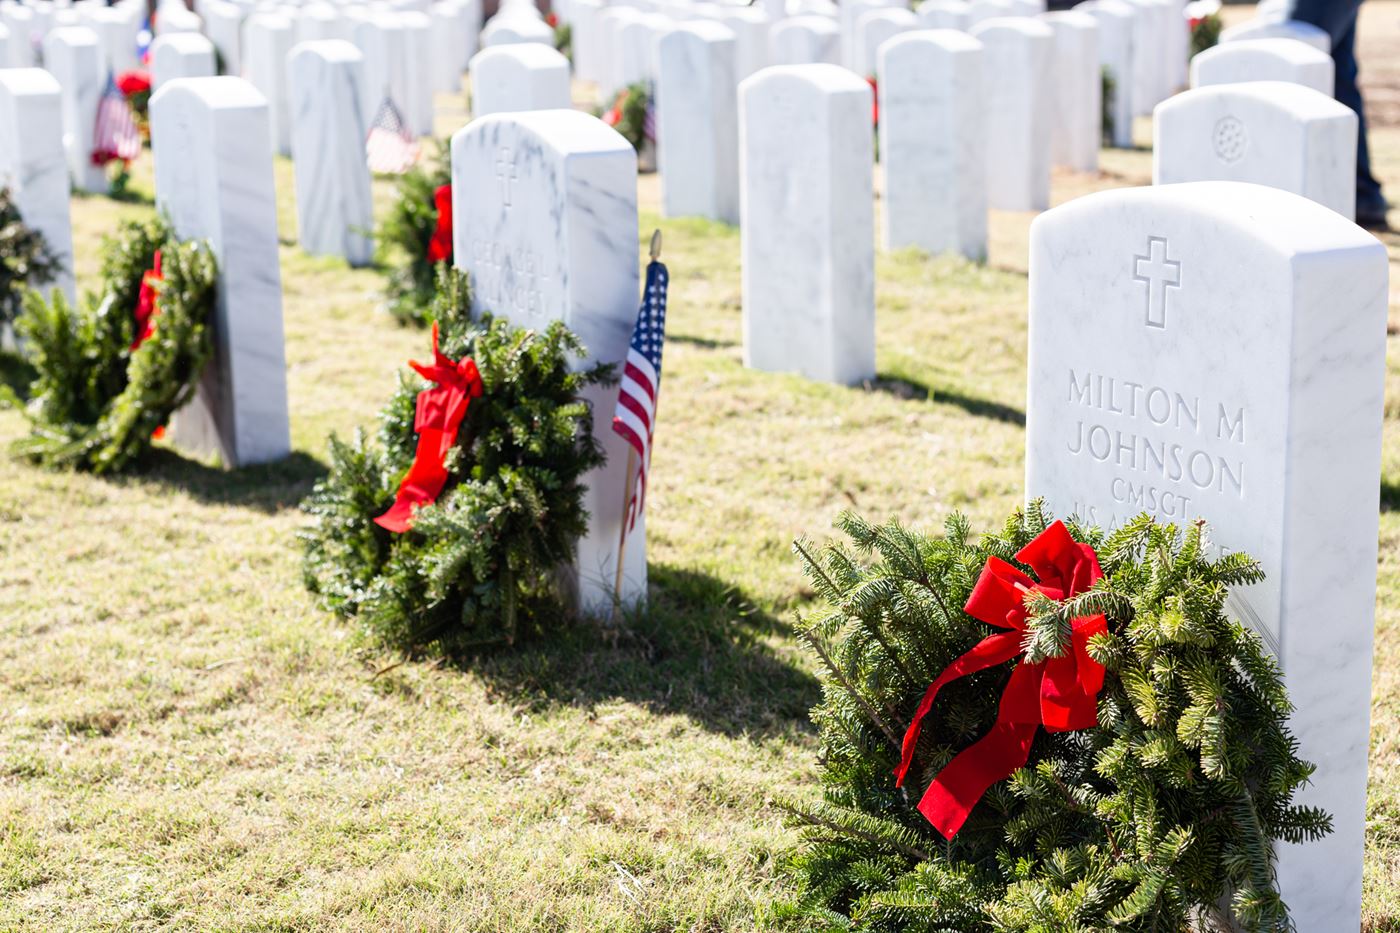 In 2019, there were not enough wreaths for all of the heroes laid to rest at Fort Sam Houston National Cemetery. Please help us this year to make sure all of these heroes are supported.